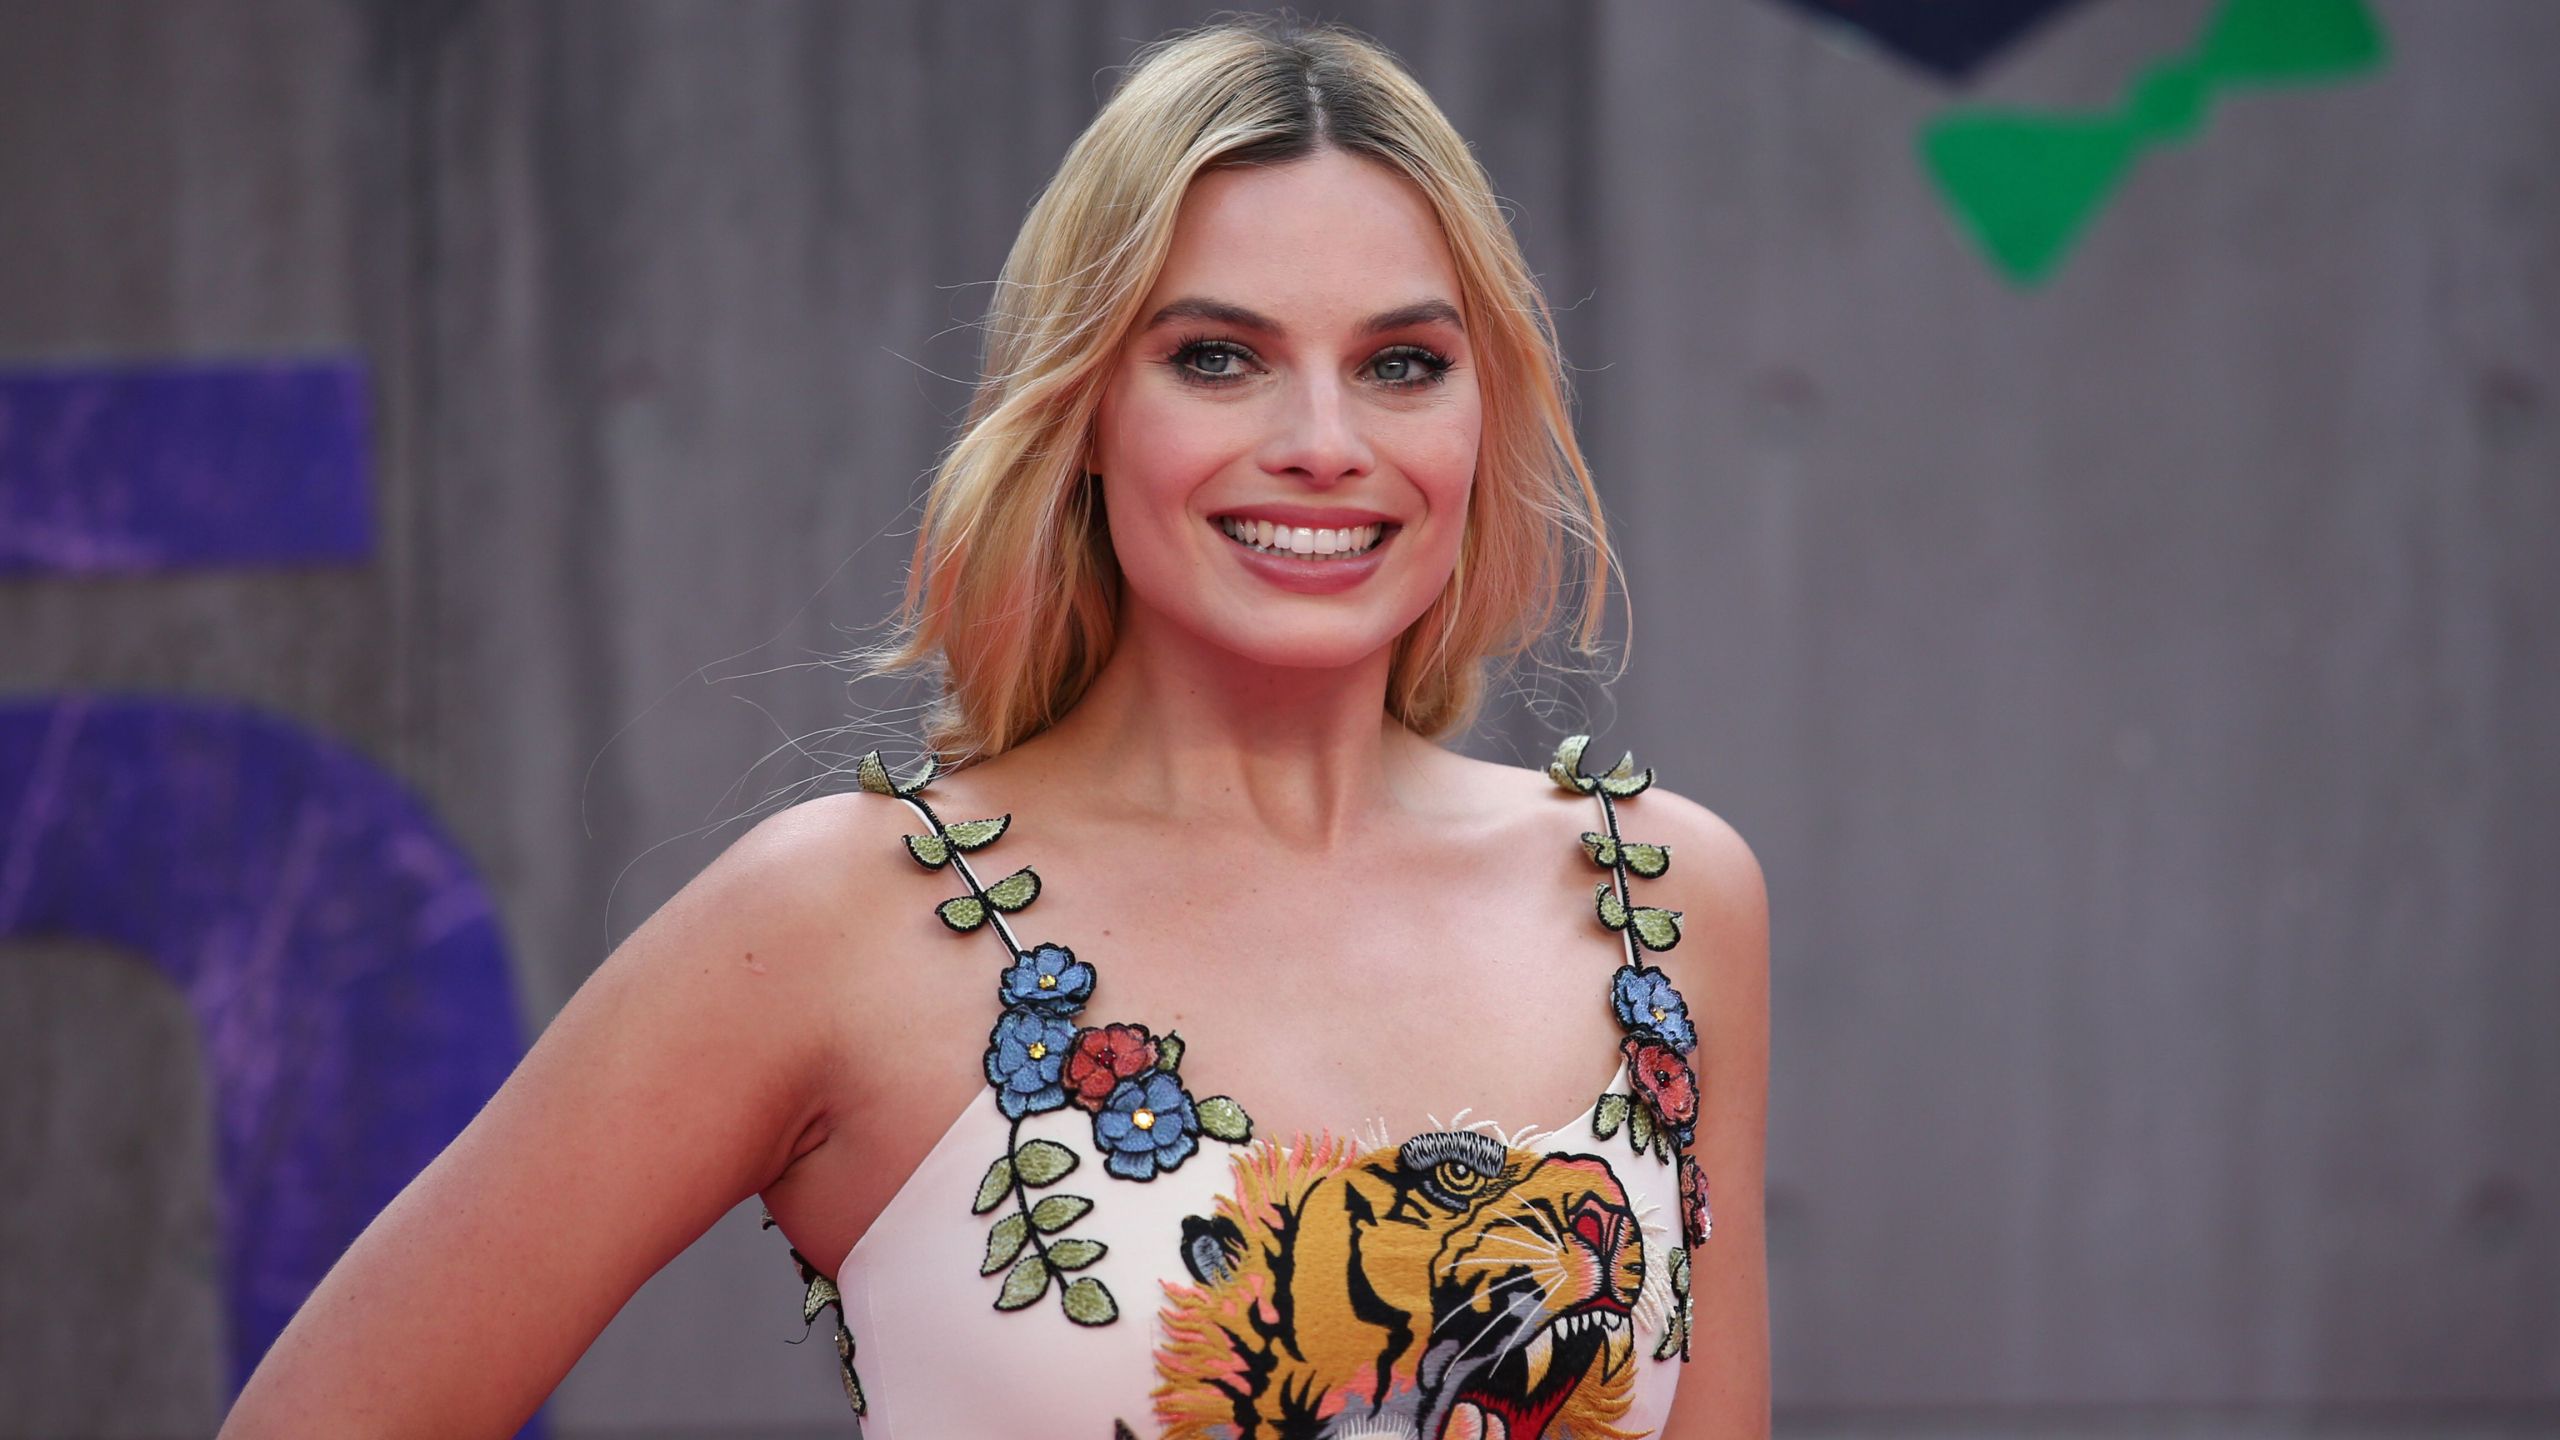 Actress Margot Robbie to return for 'The Suicide Squad'. FOX 5 San Diego